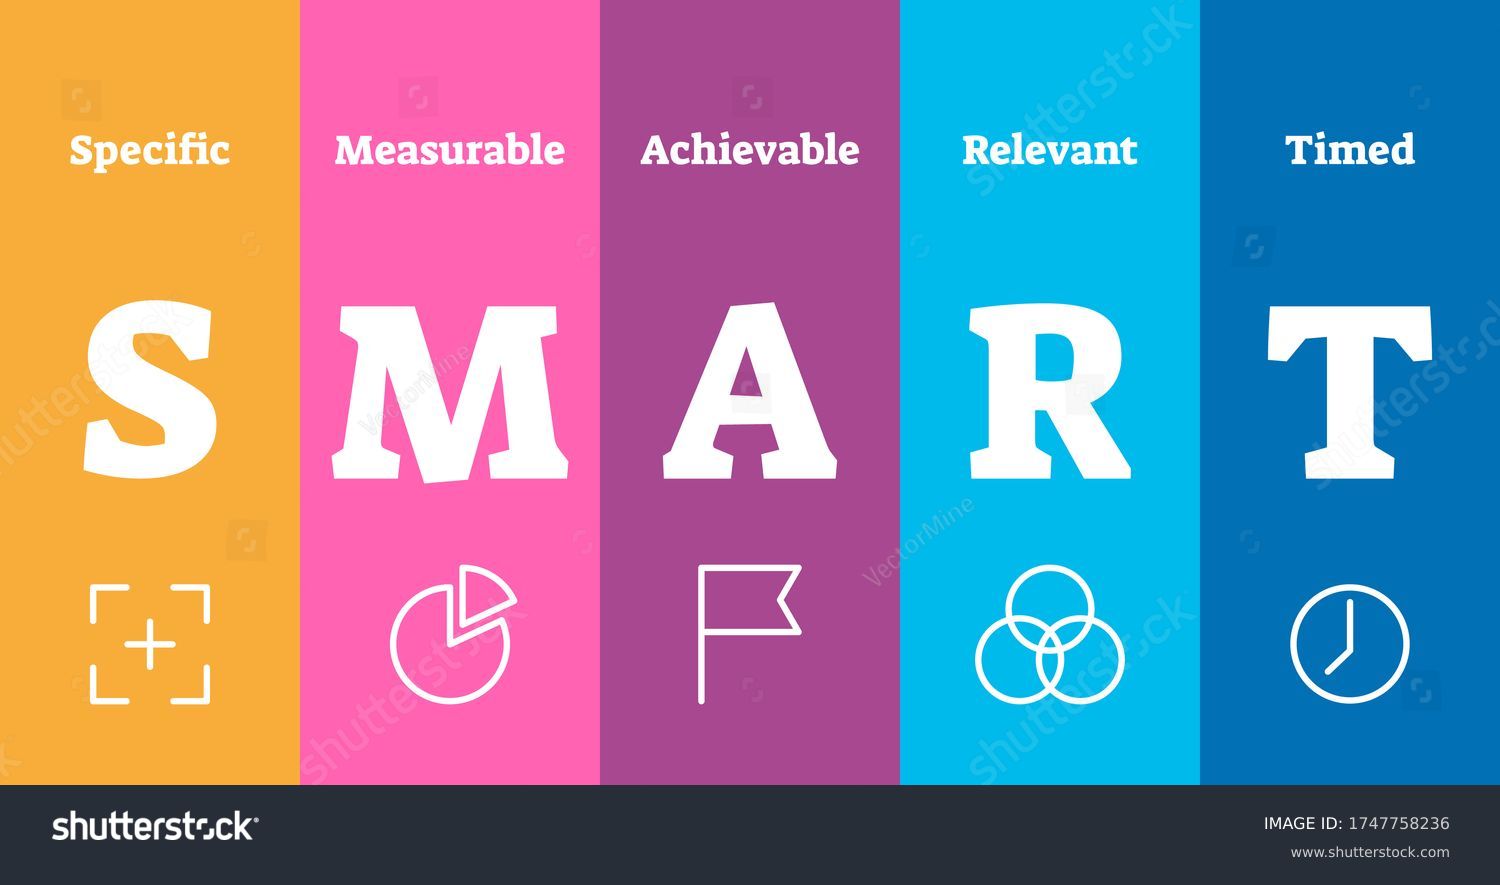 Smart explanation vector illustration. Efficient project management method as acronym of specific, measurable, achievable, relevant and timed. Personal goal setting and strategy system analysis plan. #1747758236